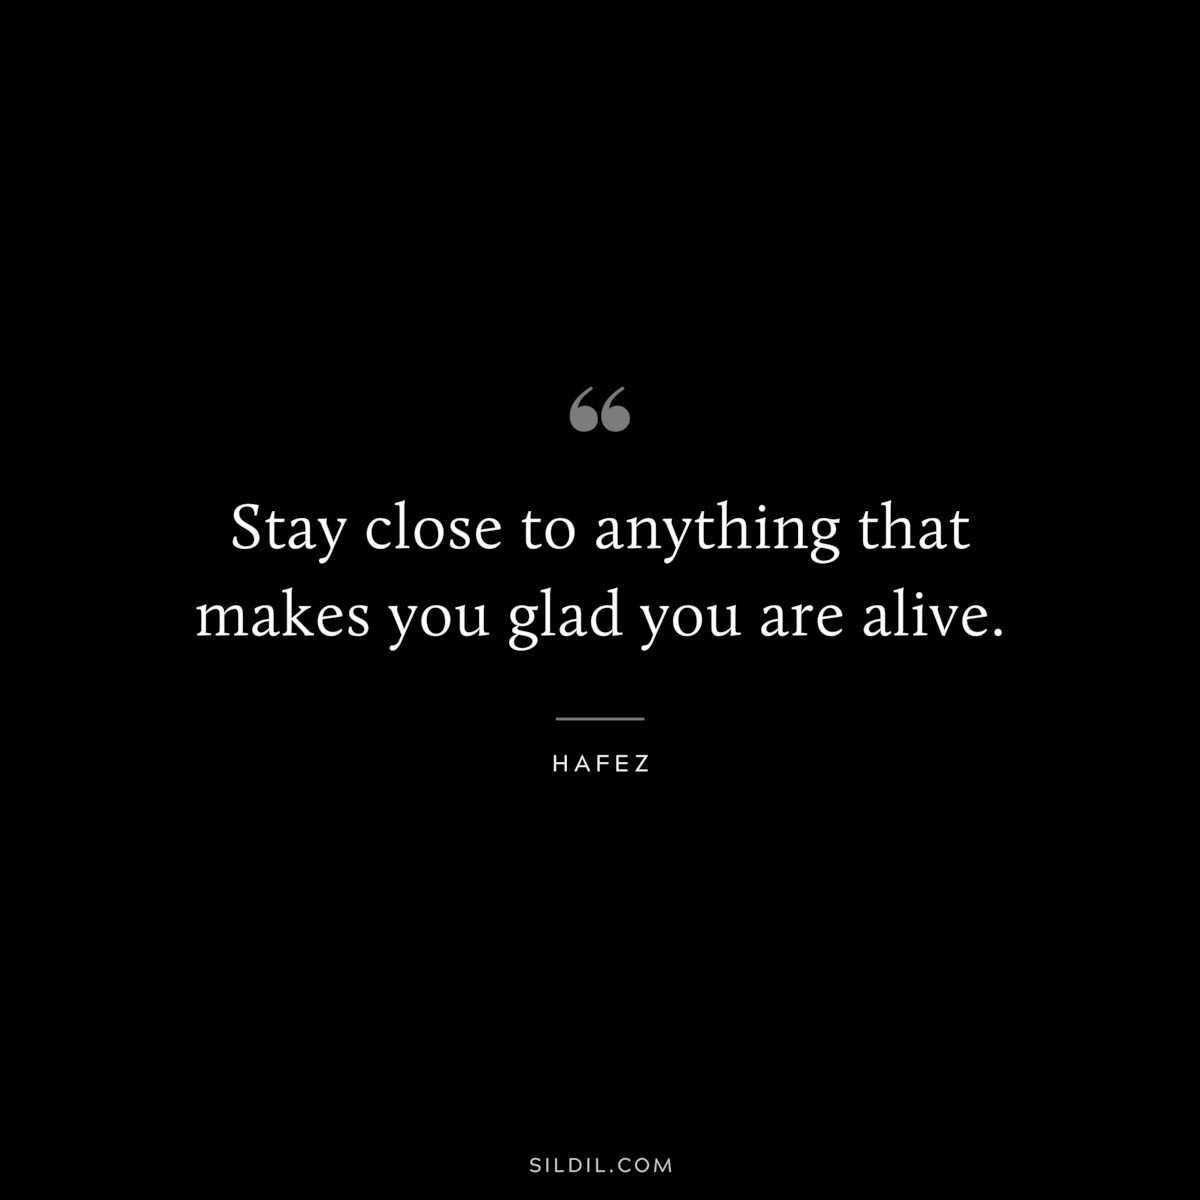 Stay close to anything that makes you glad you are alive. ― Hafez